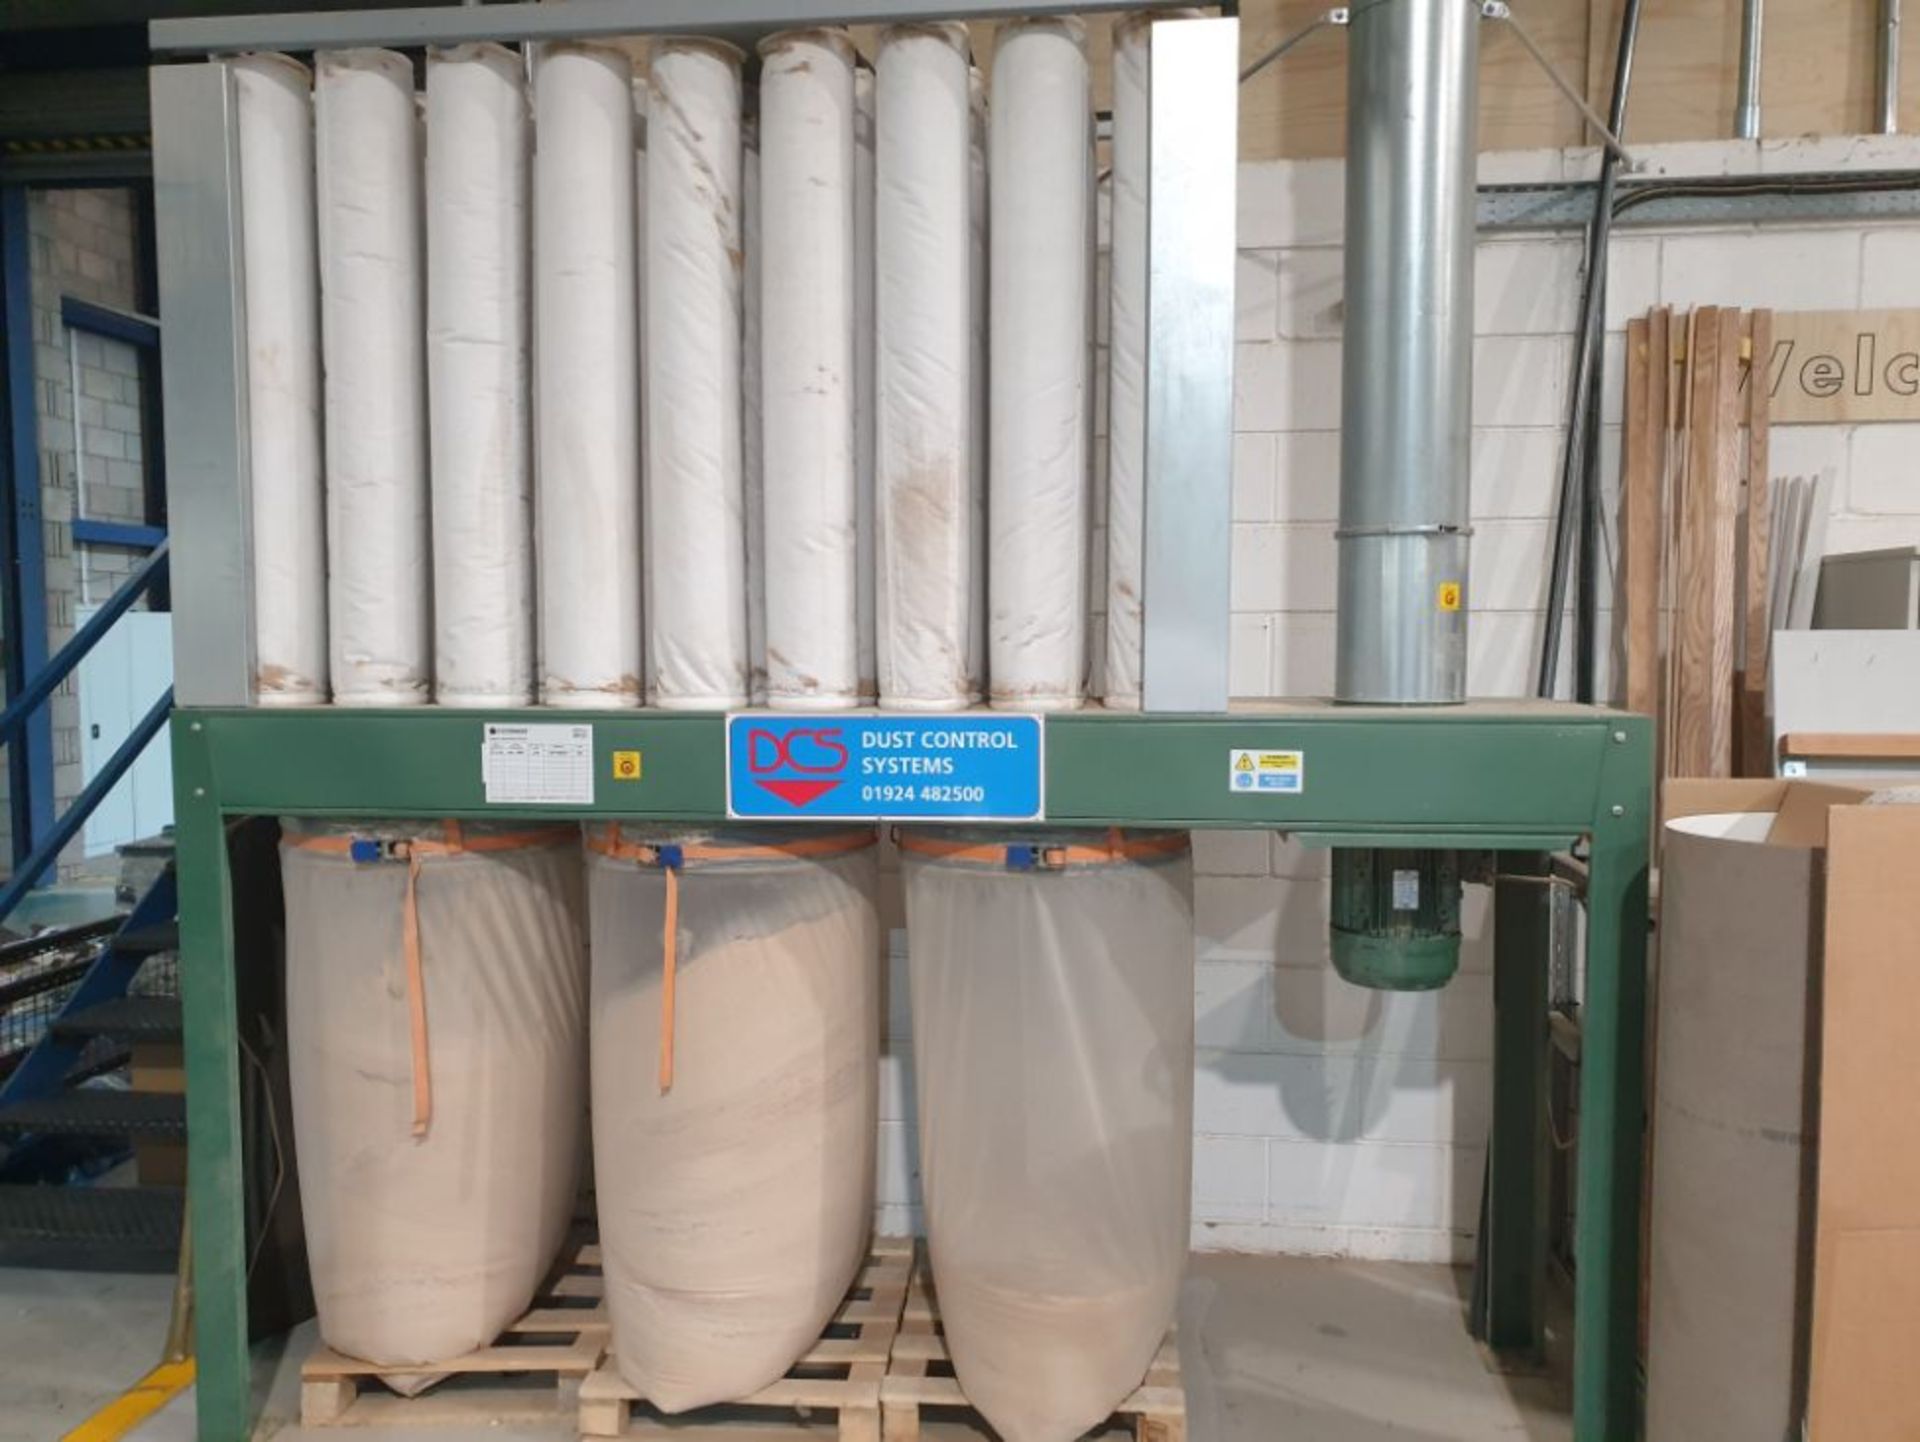 DCS MK3M 3 Bag Dust Extraction Filter Unit, Serial No. 1459, Year of Manufacture 2019, with Shaker &